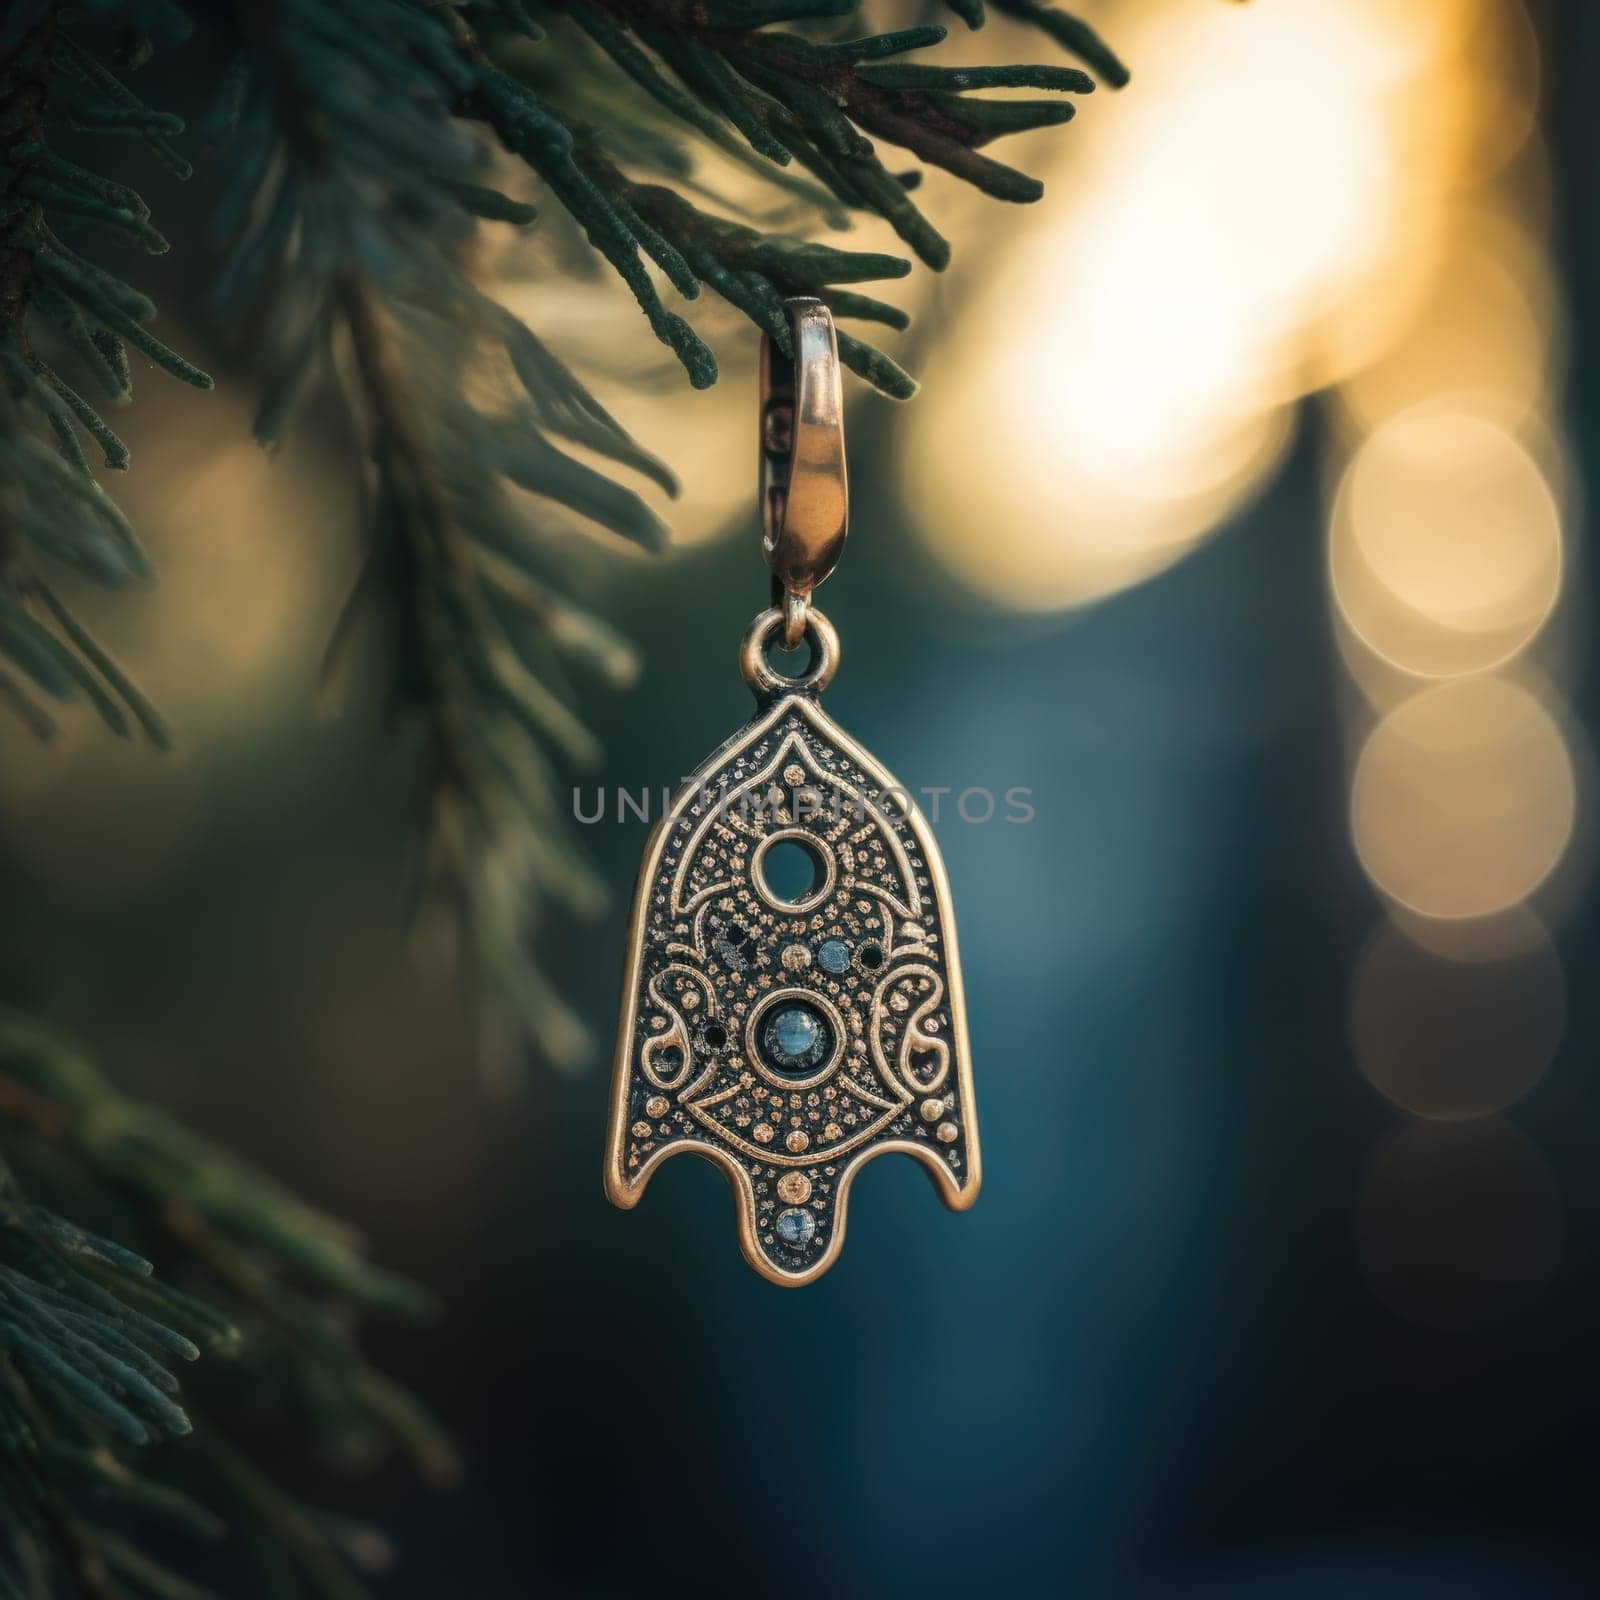 A gold hamsa pendant hanging from a tree branch